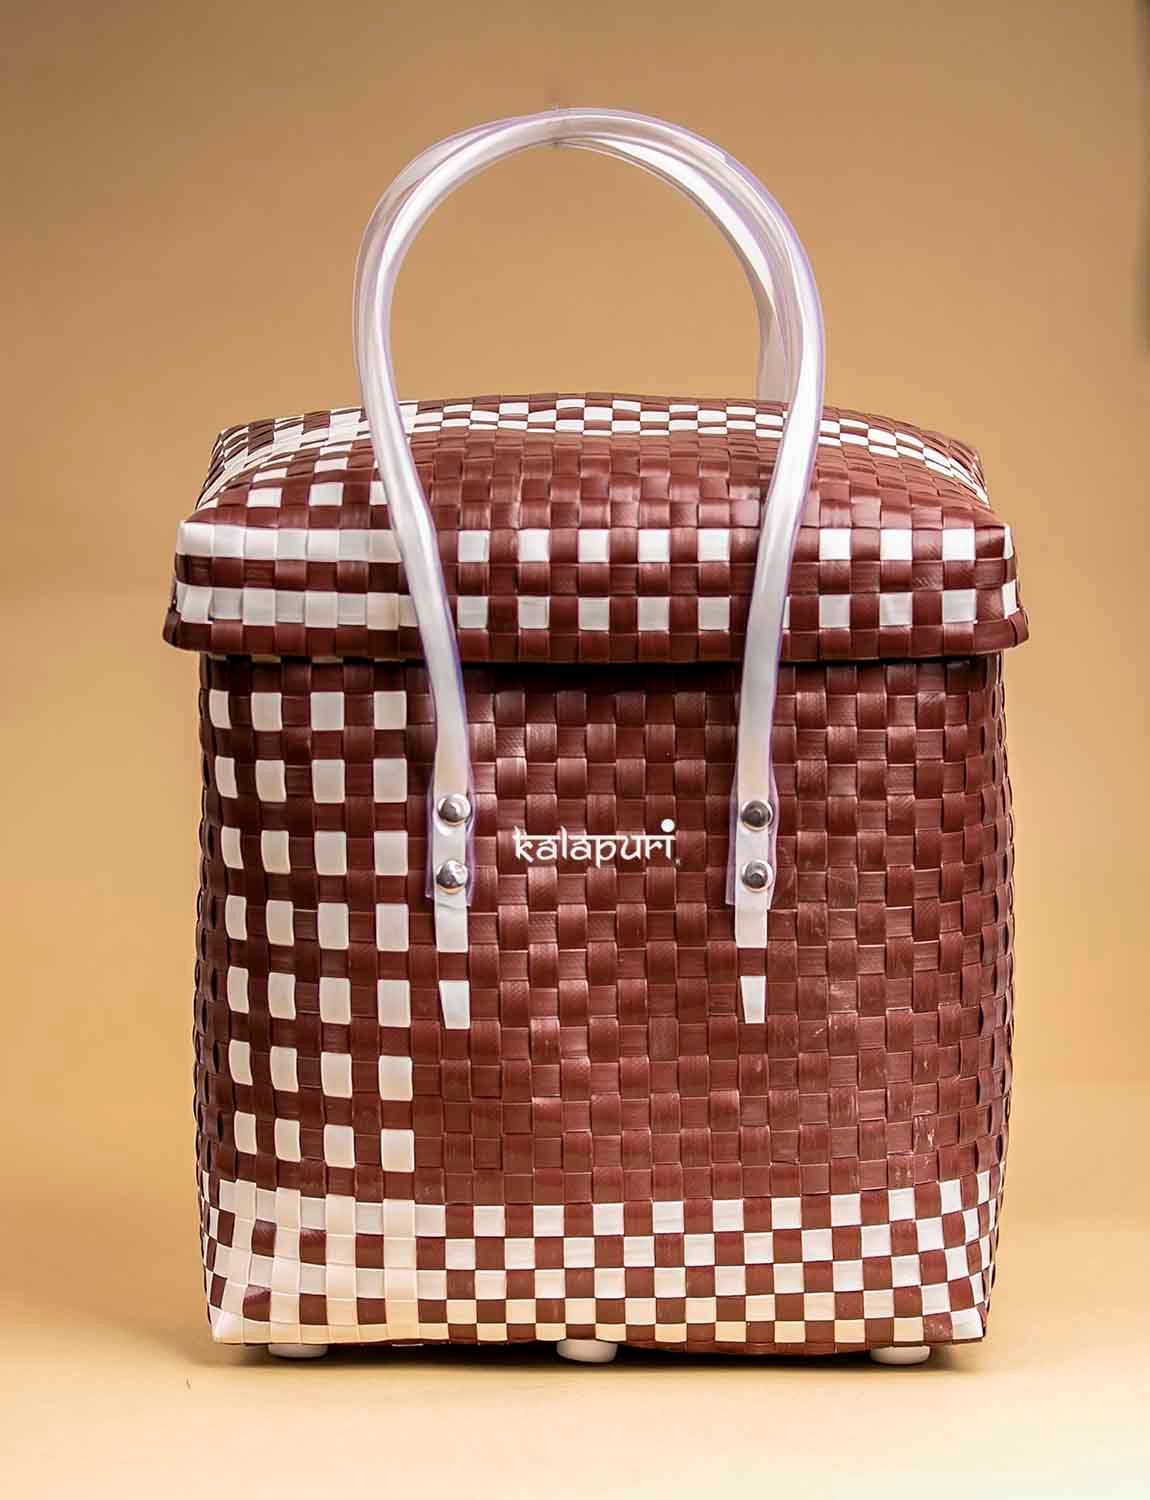 Handwoven Storage Basket with Lid